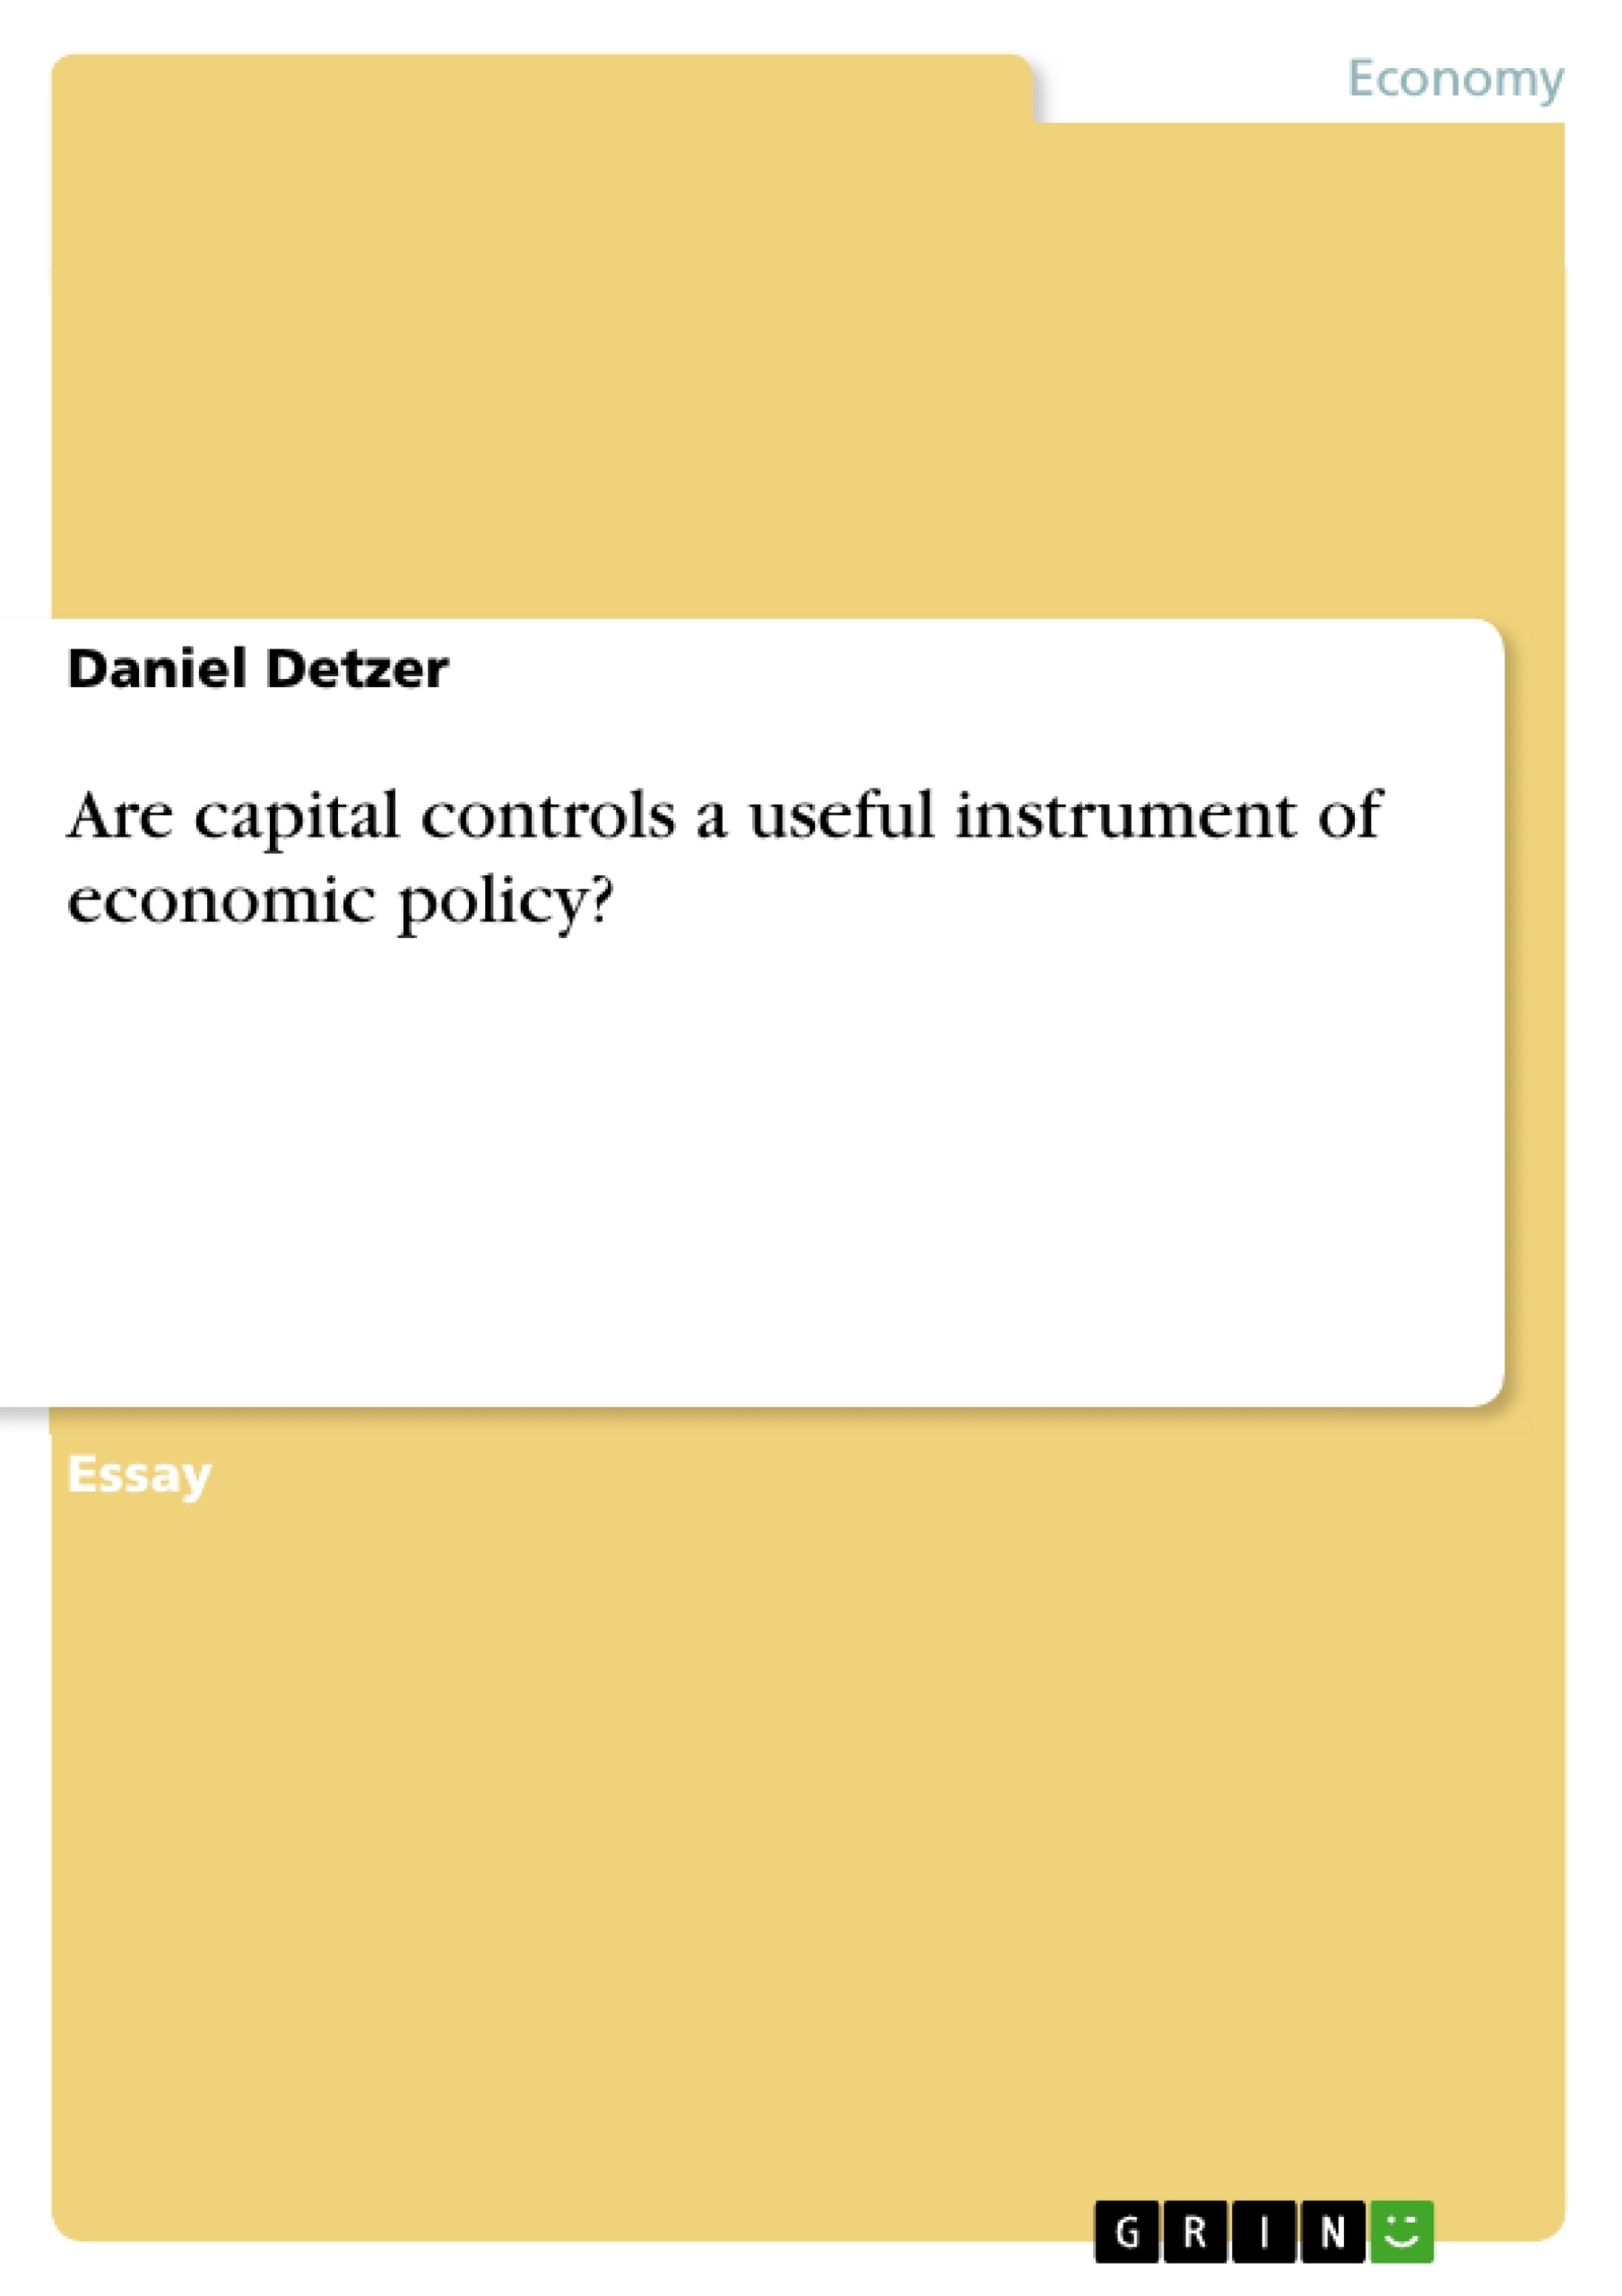 Title: Are capital controls a useful instrument of economic policy?